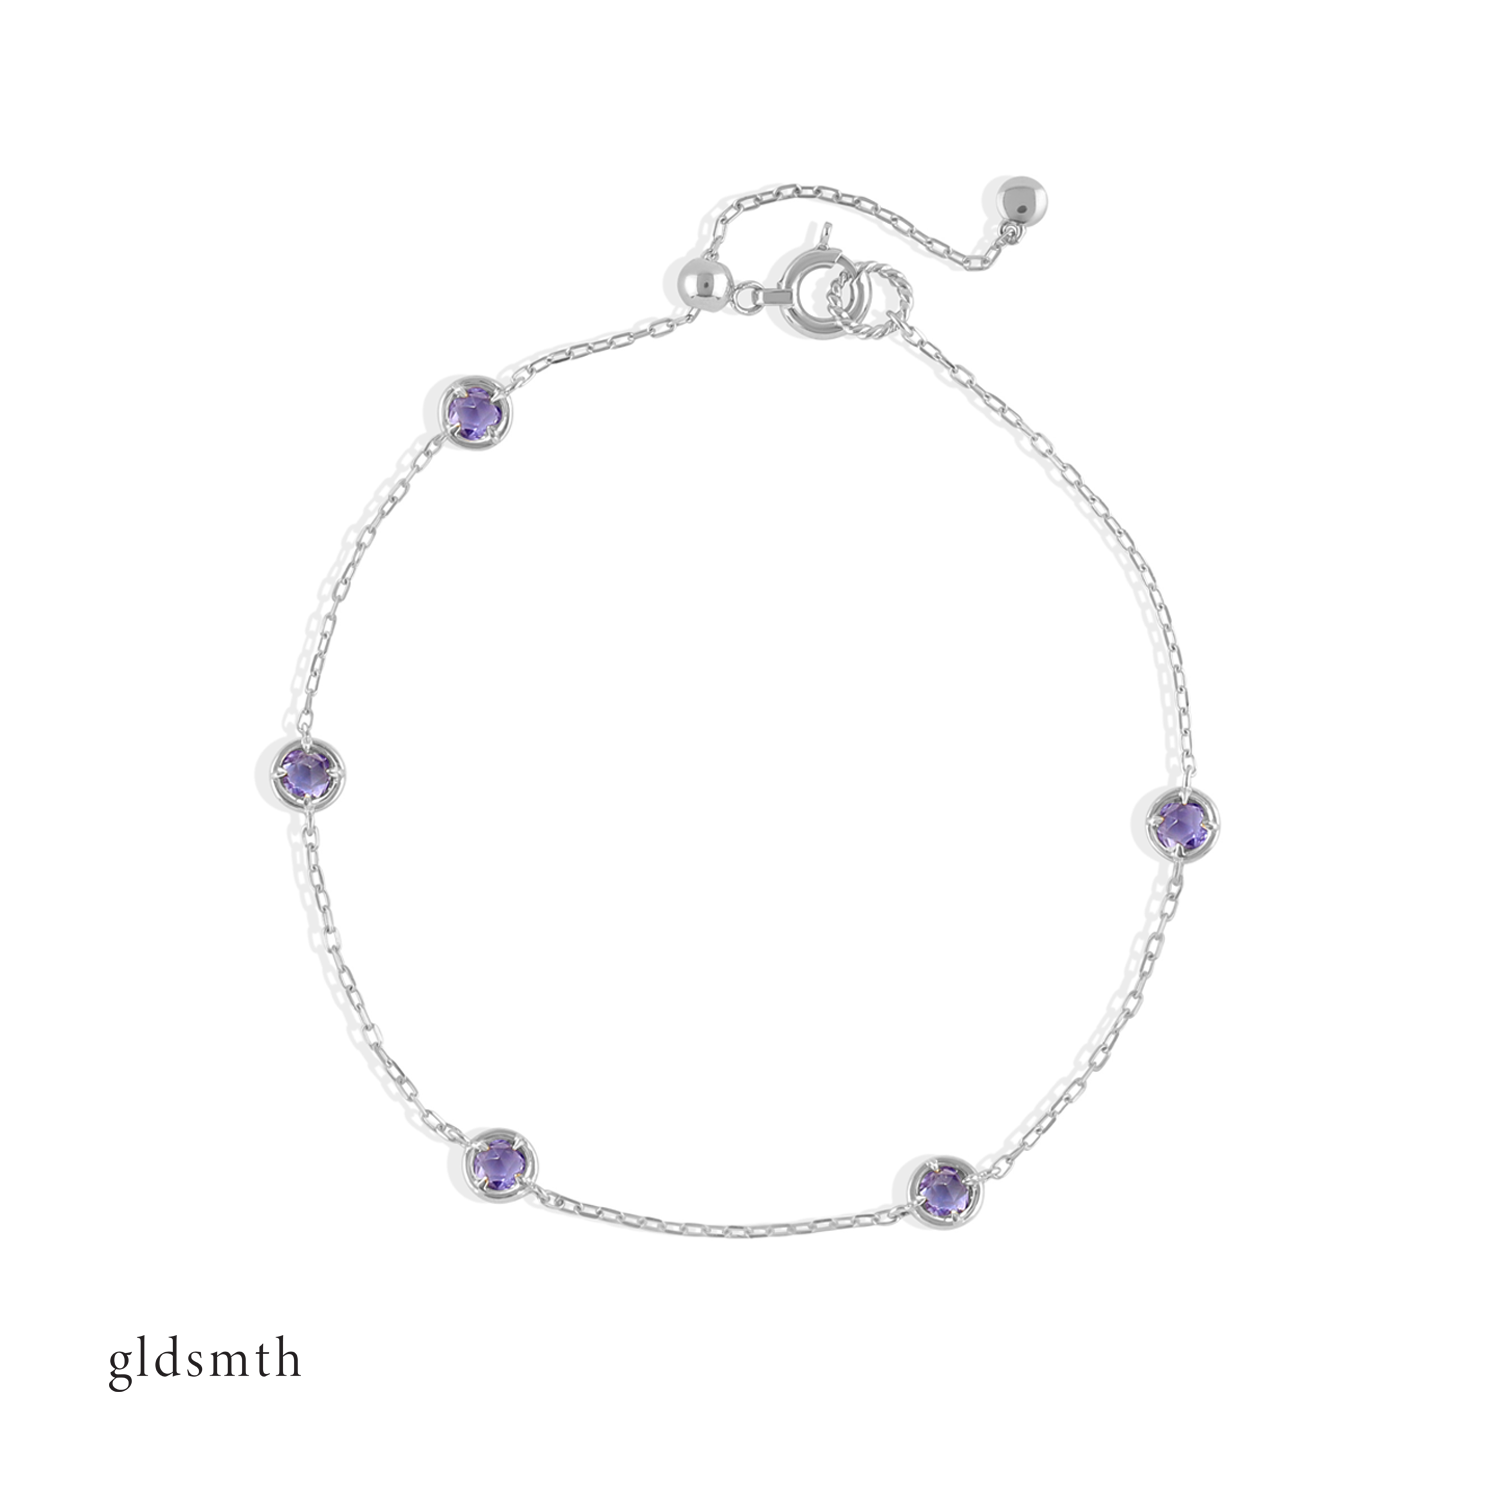 Elegant and fine handcrafted 10k solid white gold bracelet with tanzanite.